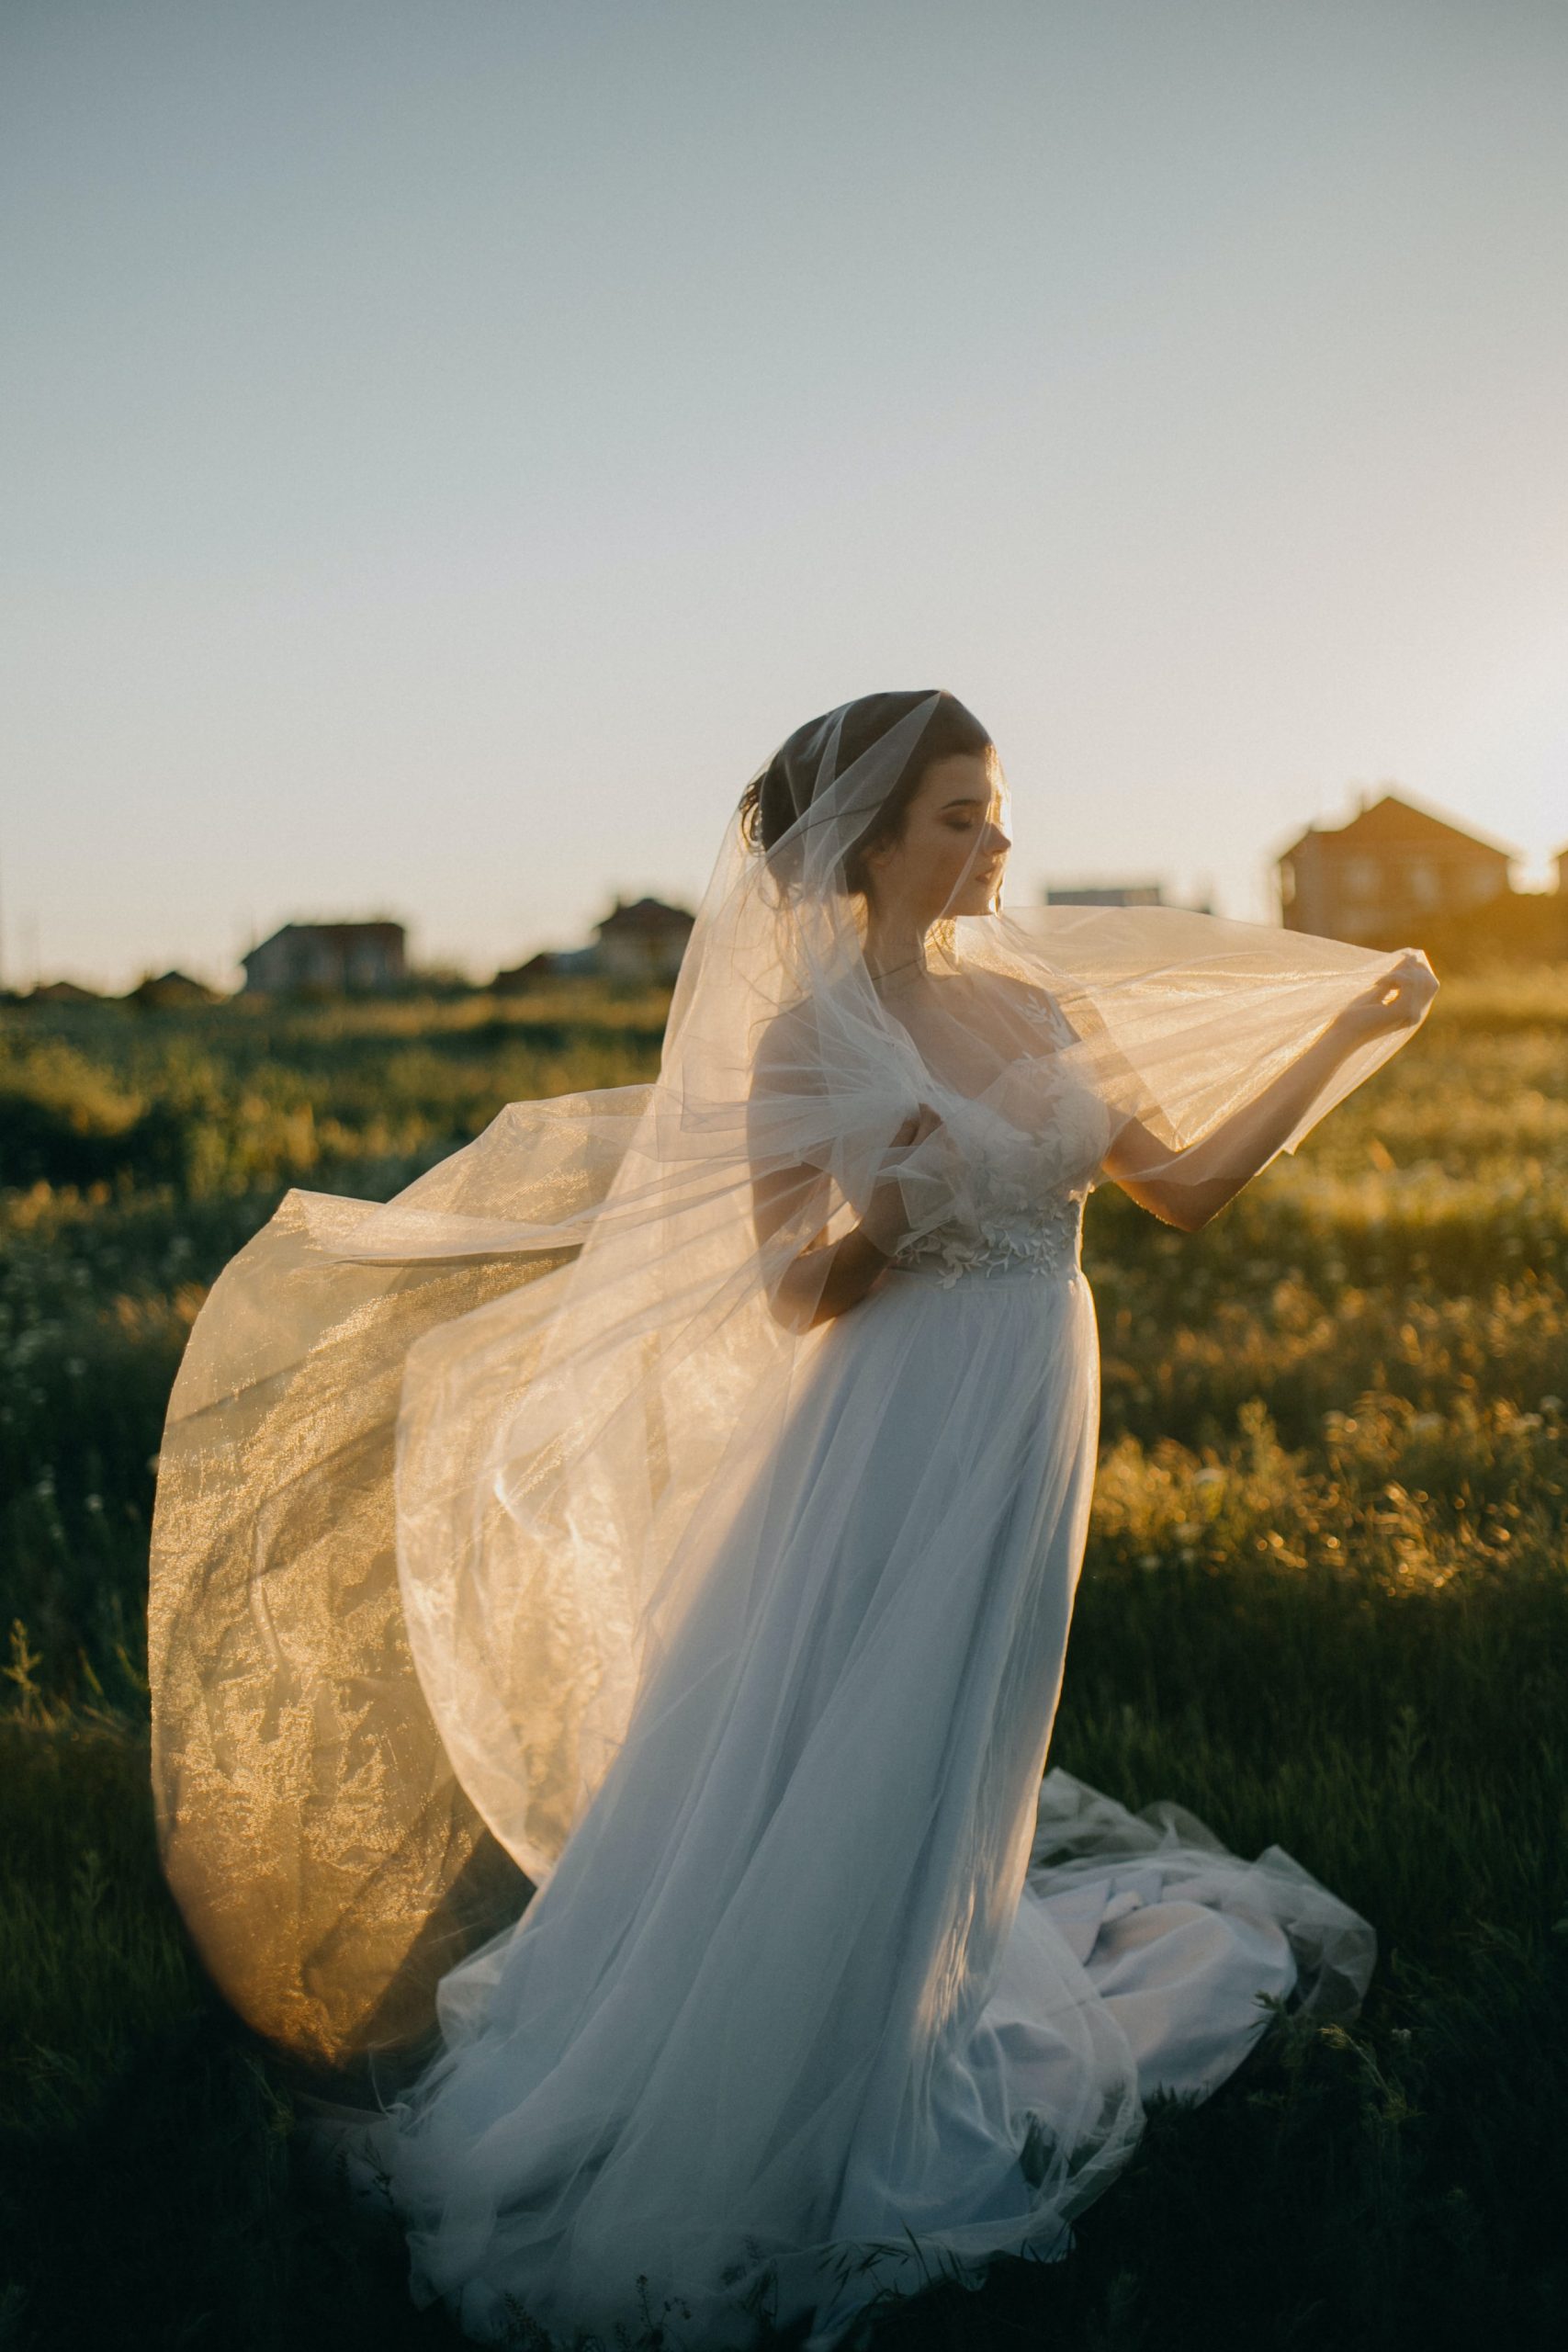 "A beautiful bride stands confidently with a proud smile on a sunny and windy day, with her veil blowing in the breeze."